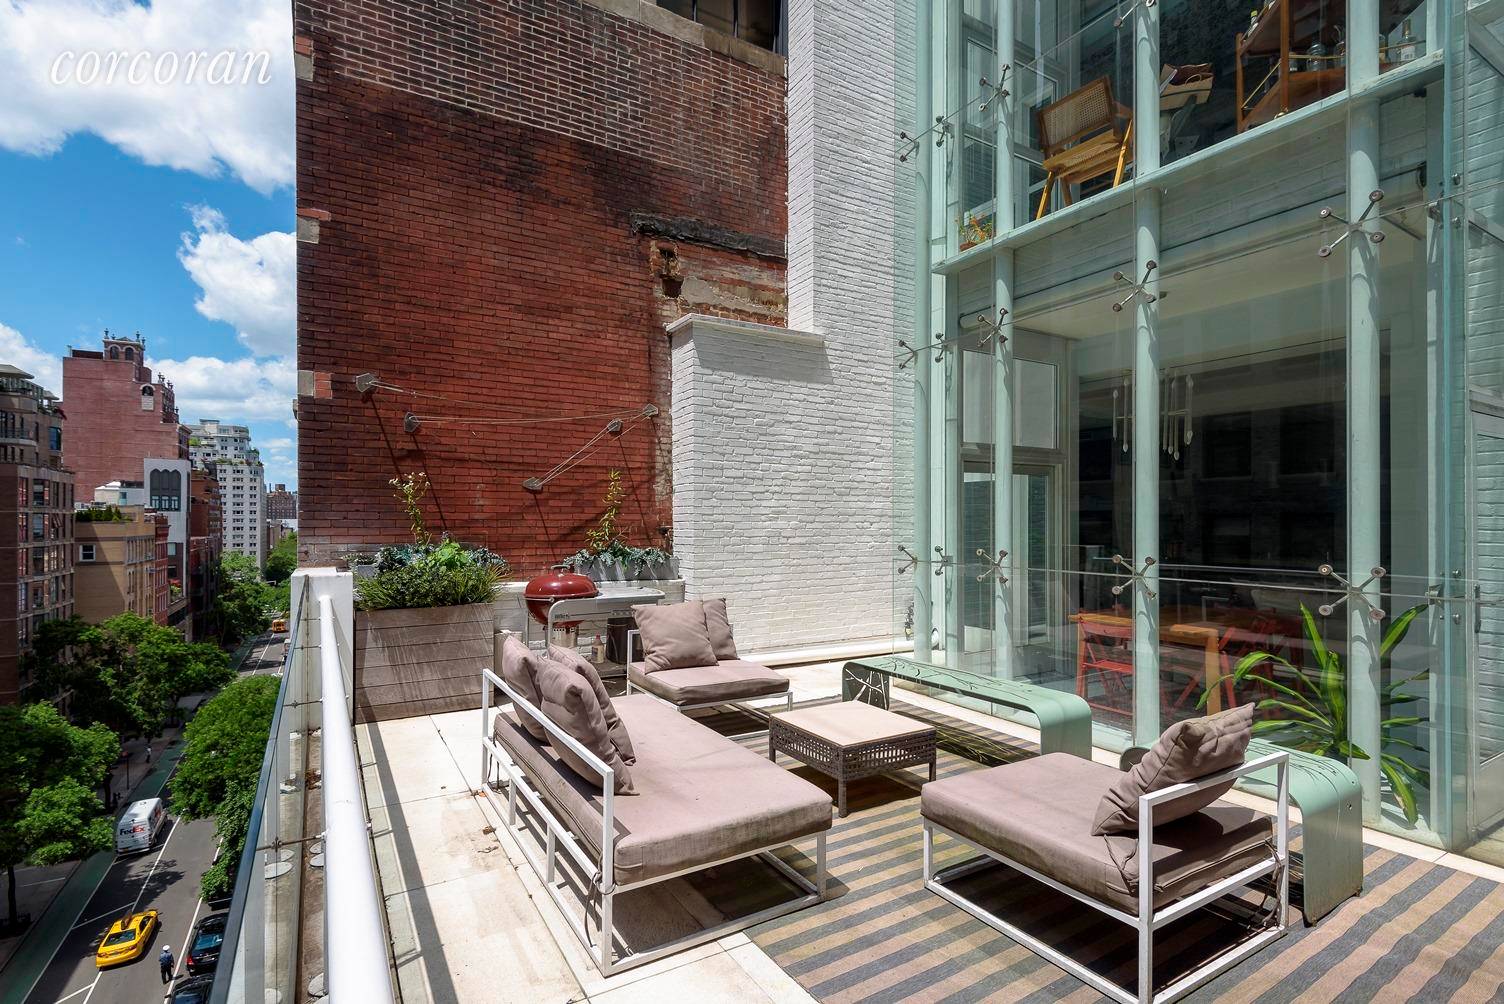 Located in the heart of Greenwich Village off Fifth Avenue, this wonderfully sunny south facing two bedroom and two bathroom contemporary home includes an expansive 25 X 18 sunny terrace ...